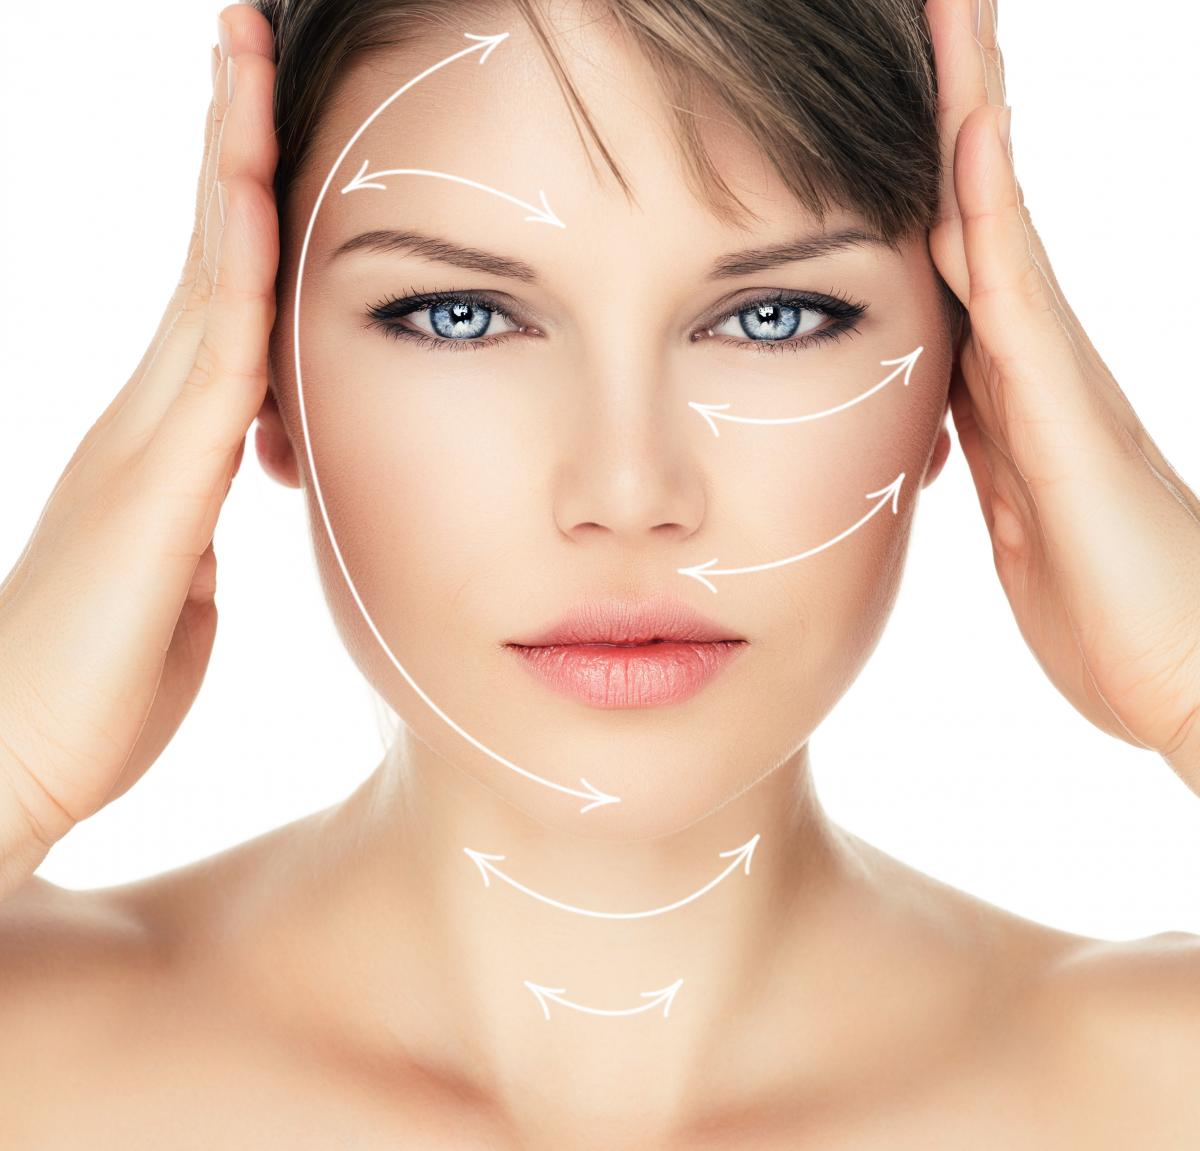 Can Botox Be Used To Reduce Pain Or Headaches - Non-surgical Orthopaedics - Non-surgical Orthopaedics